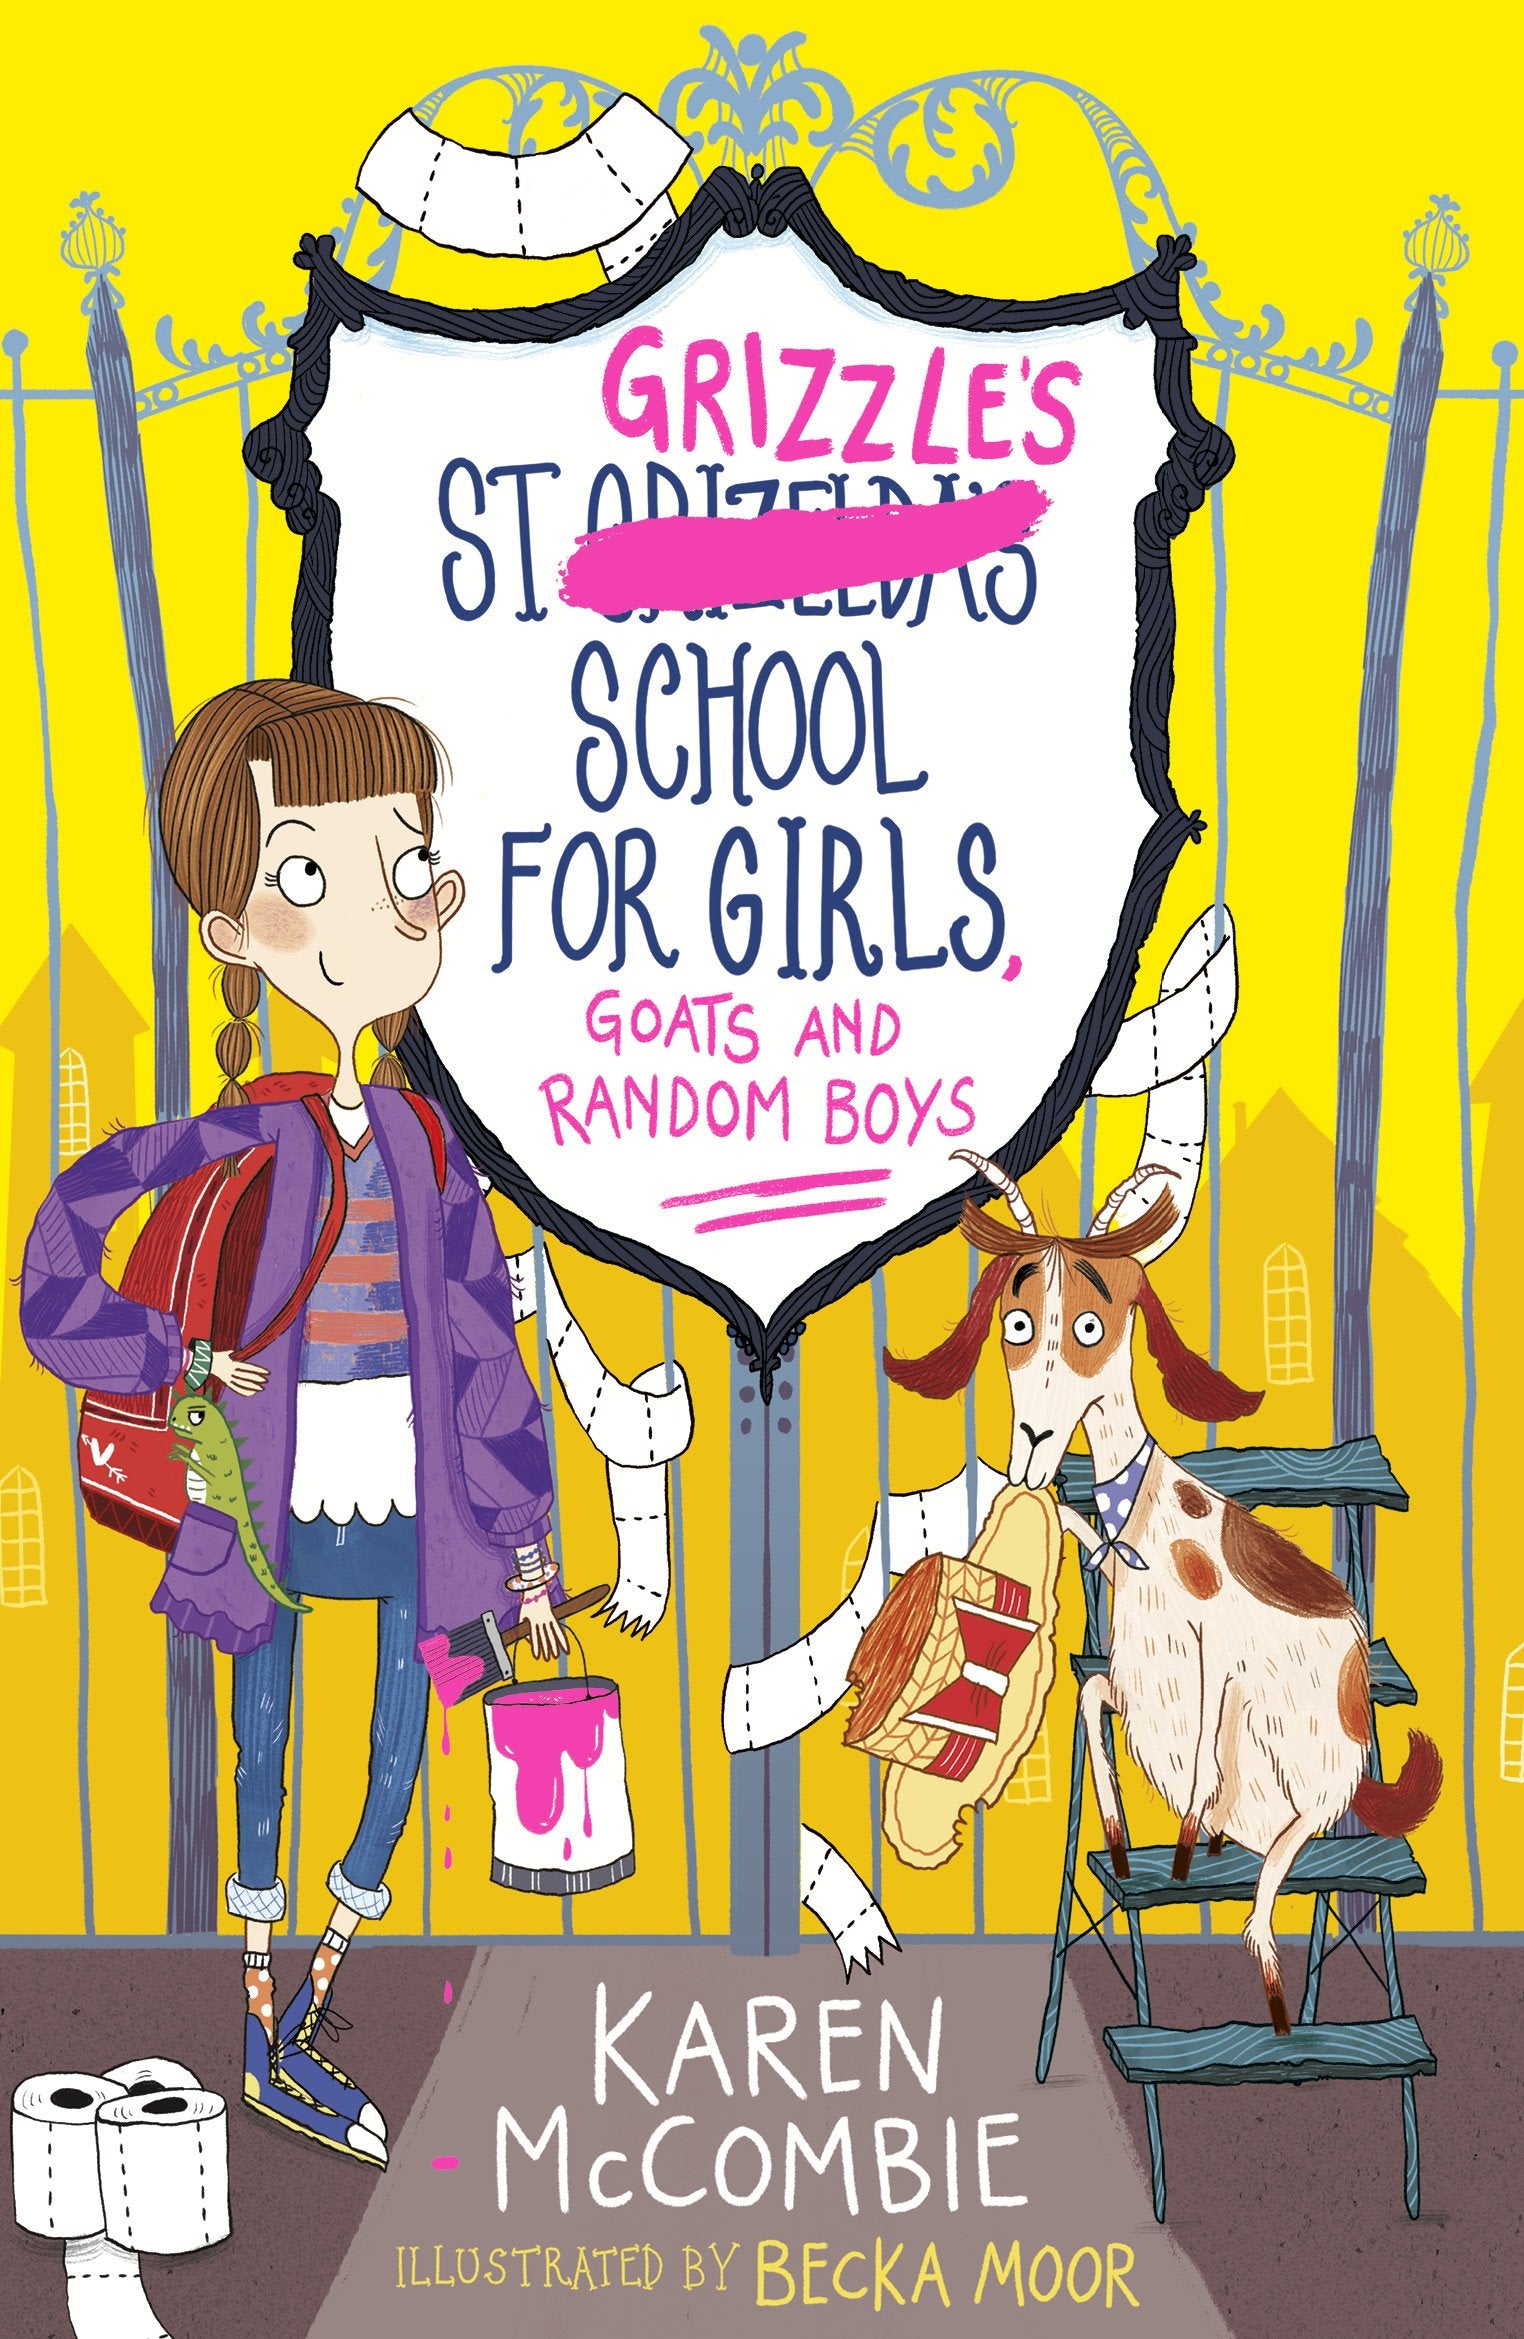 St Grizzle’s School for Girls, Goats and Random Boys (Book 1)